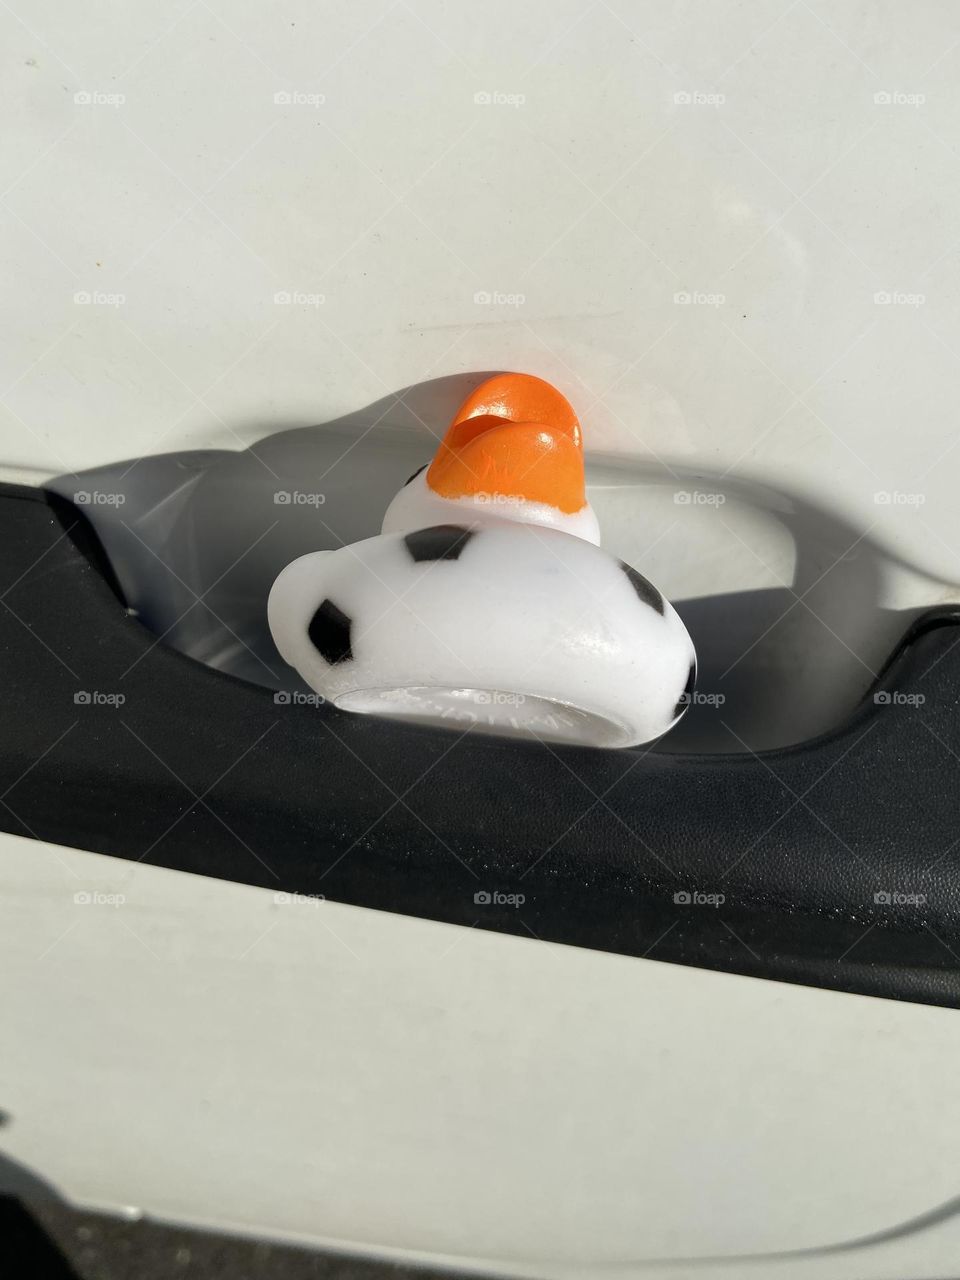 A rubber duck that was placed in the door handle of my Jeep one day when I was out shopping at the mall. Now, it rides with me everywhere, along with another duck that was anonymously gifted to me later as part of a “DuckDuckJeep” movement. So cute! 